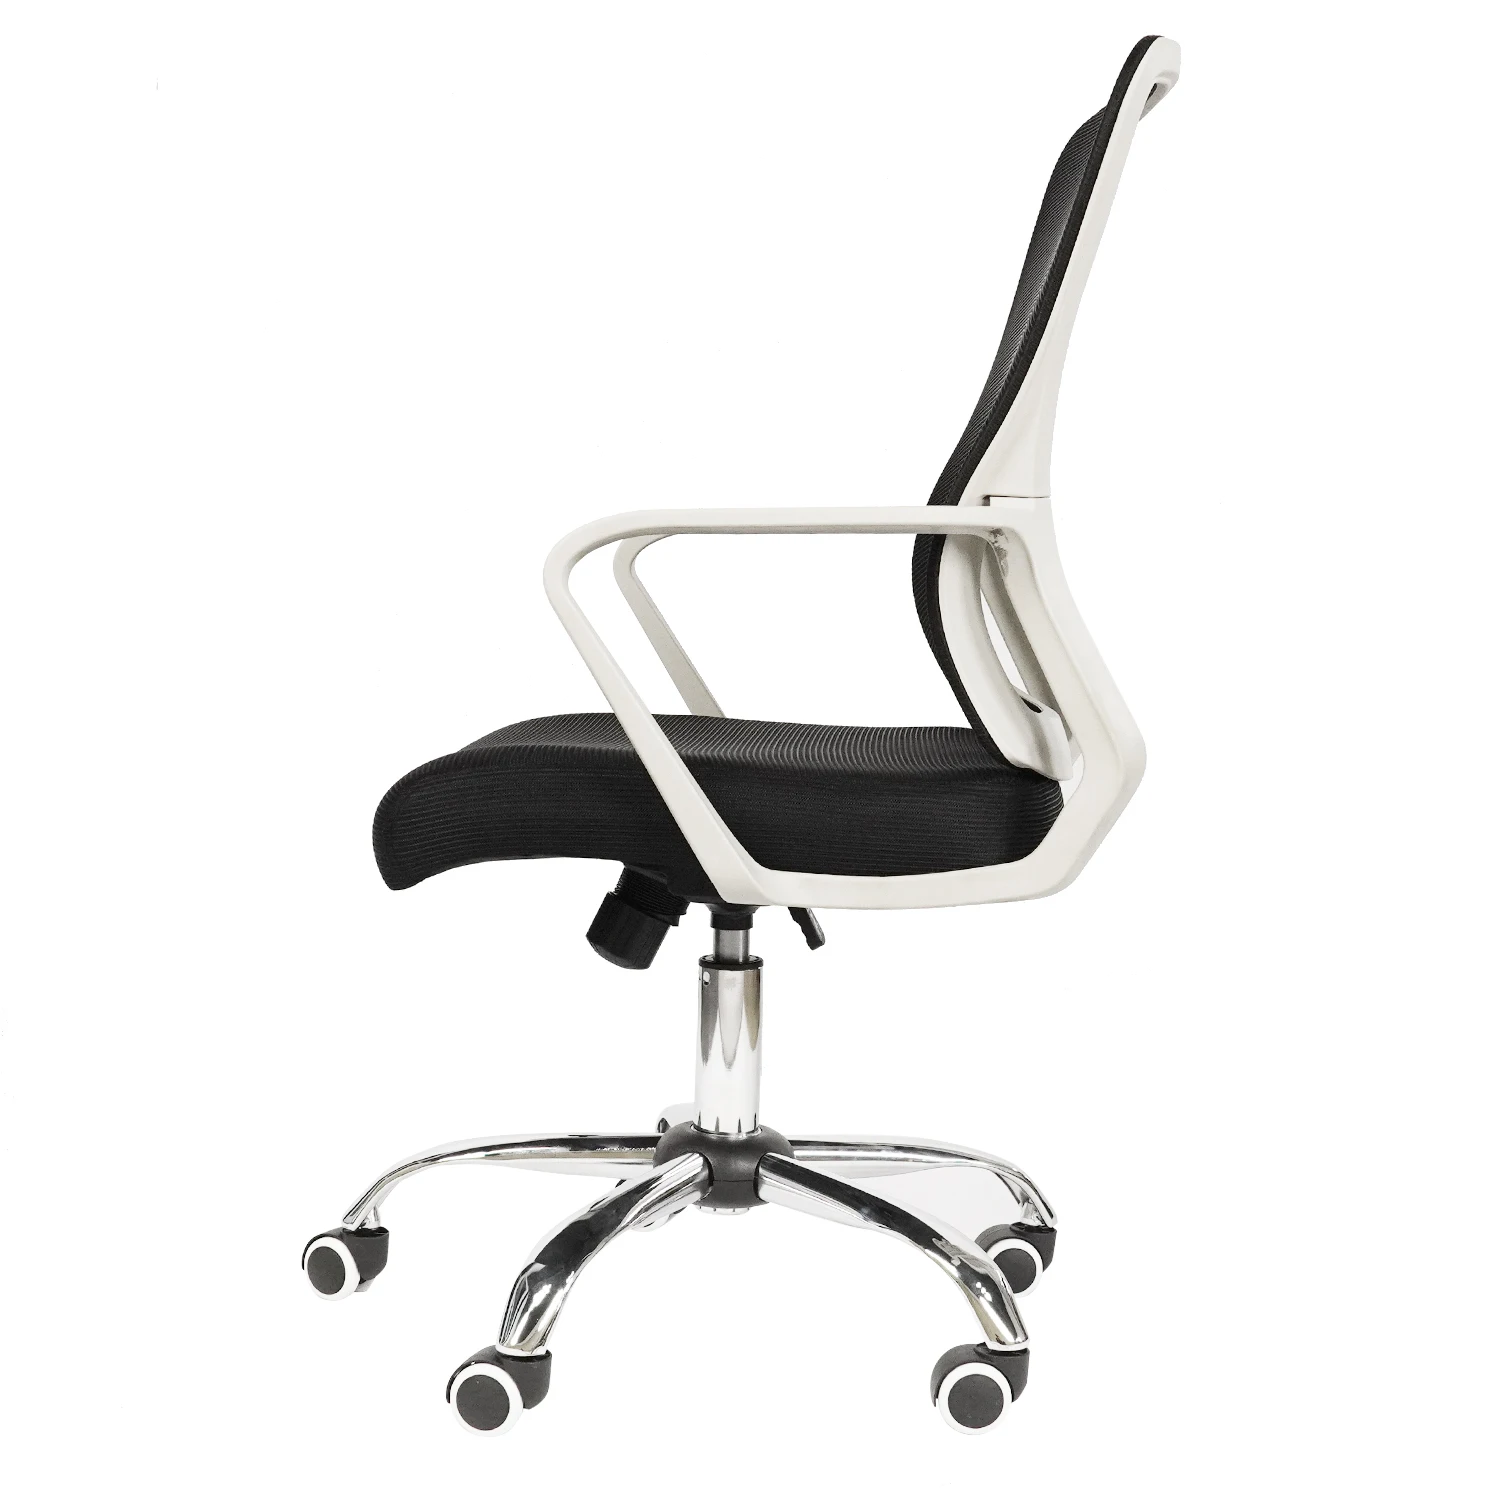 Wholesale Staff Computer Chair Modern Adjustable Mesh Office Chair - Buy Office  Chairs,Executive Chairs,Ergonomic Chairs Product on 